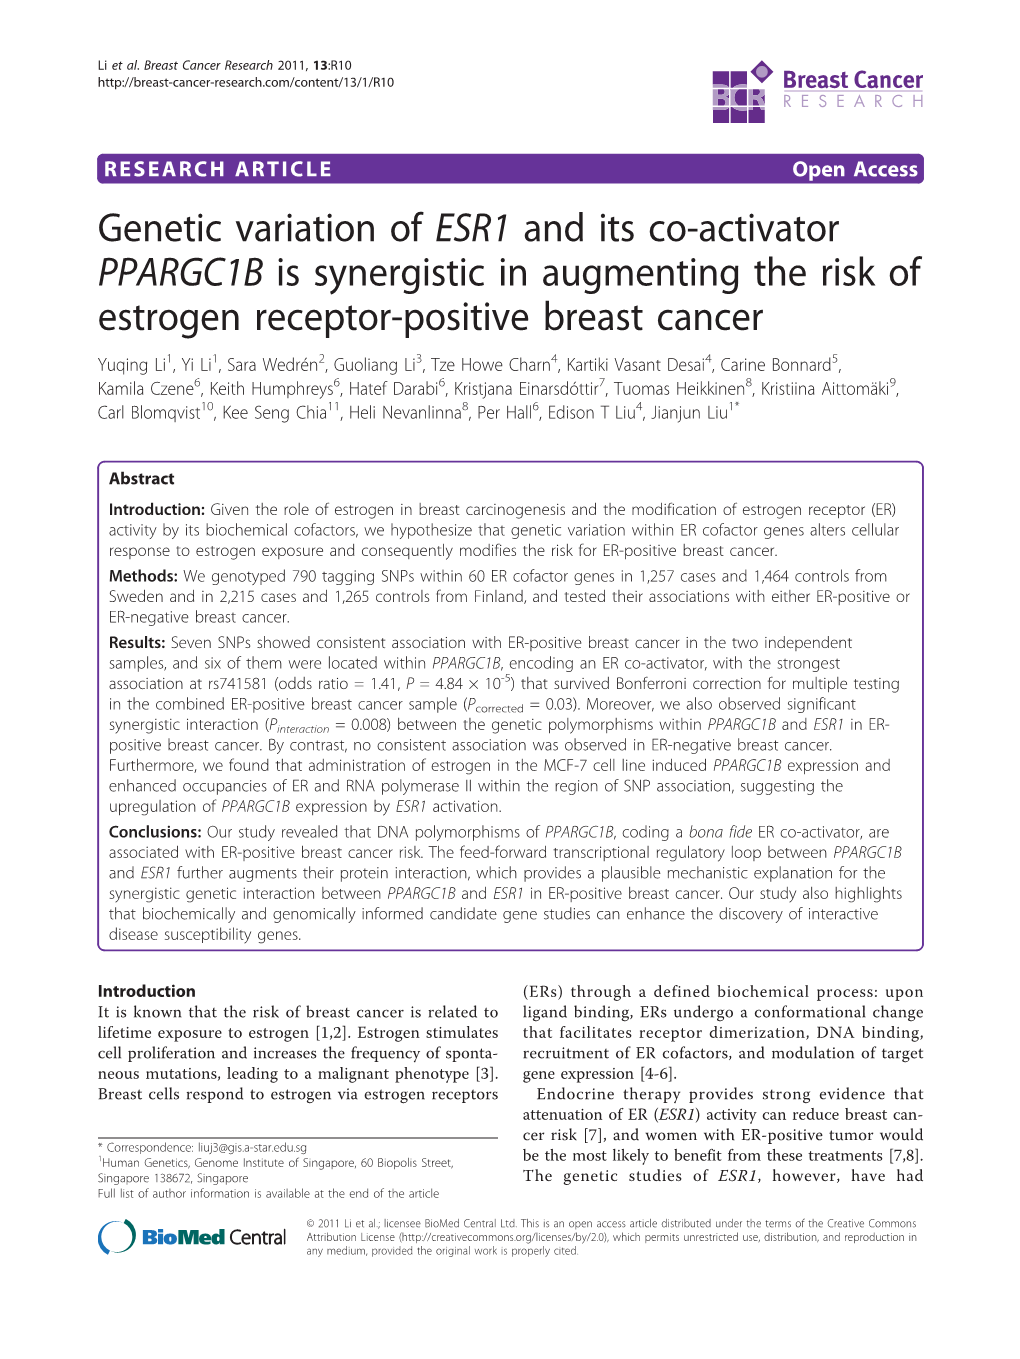 Genetic Variation of ESR1 and Its Co-Activator PPARGC1B Is